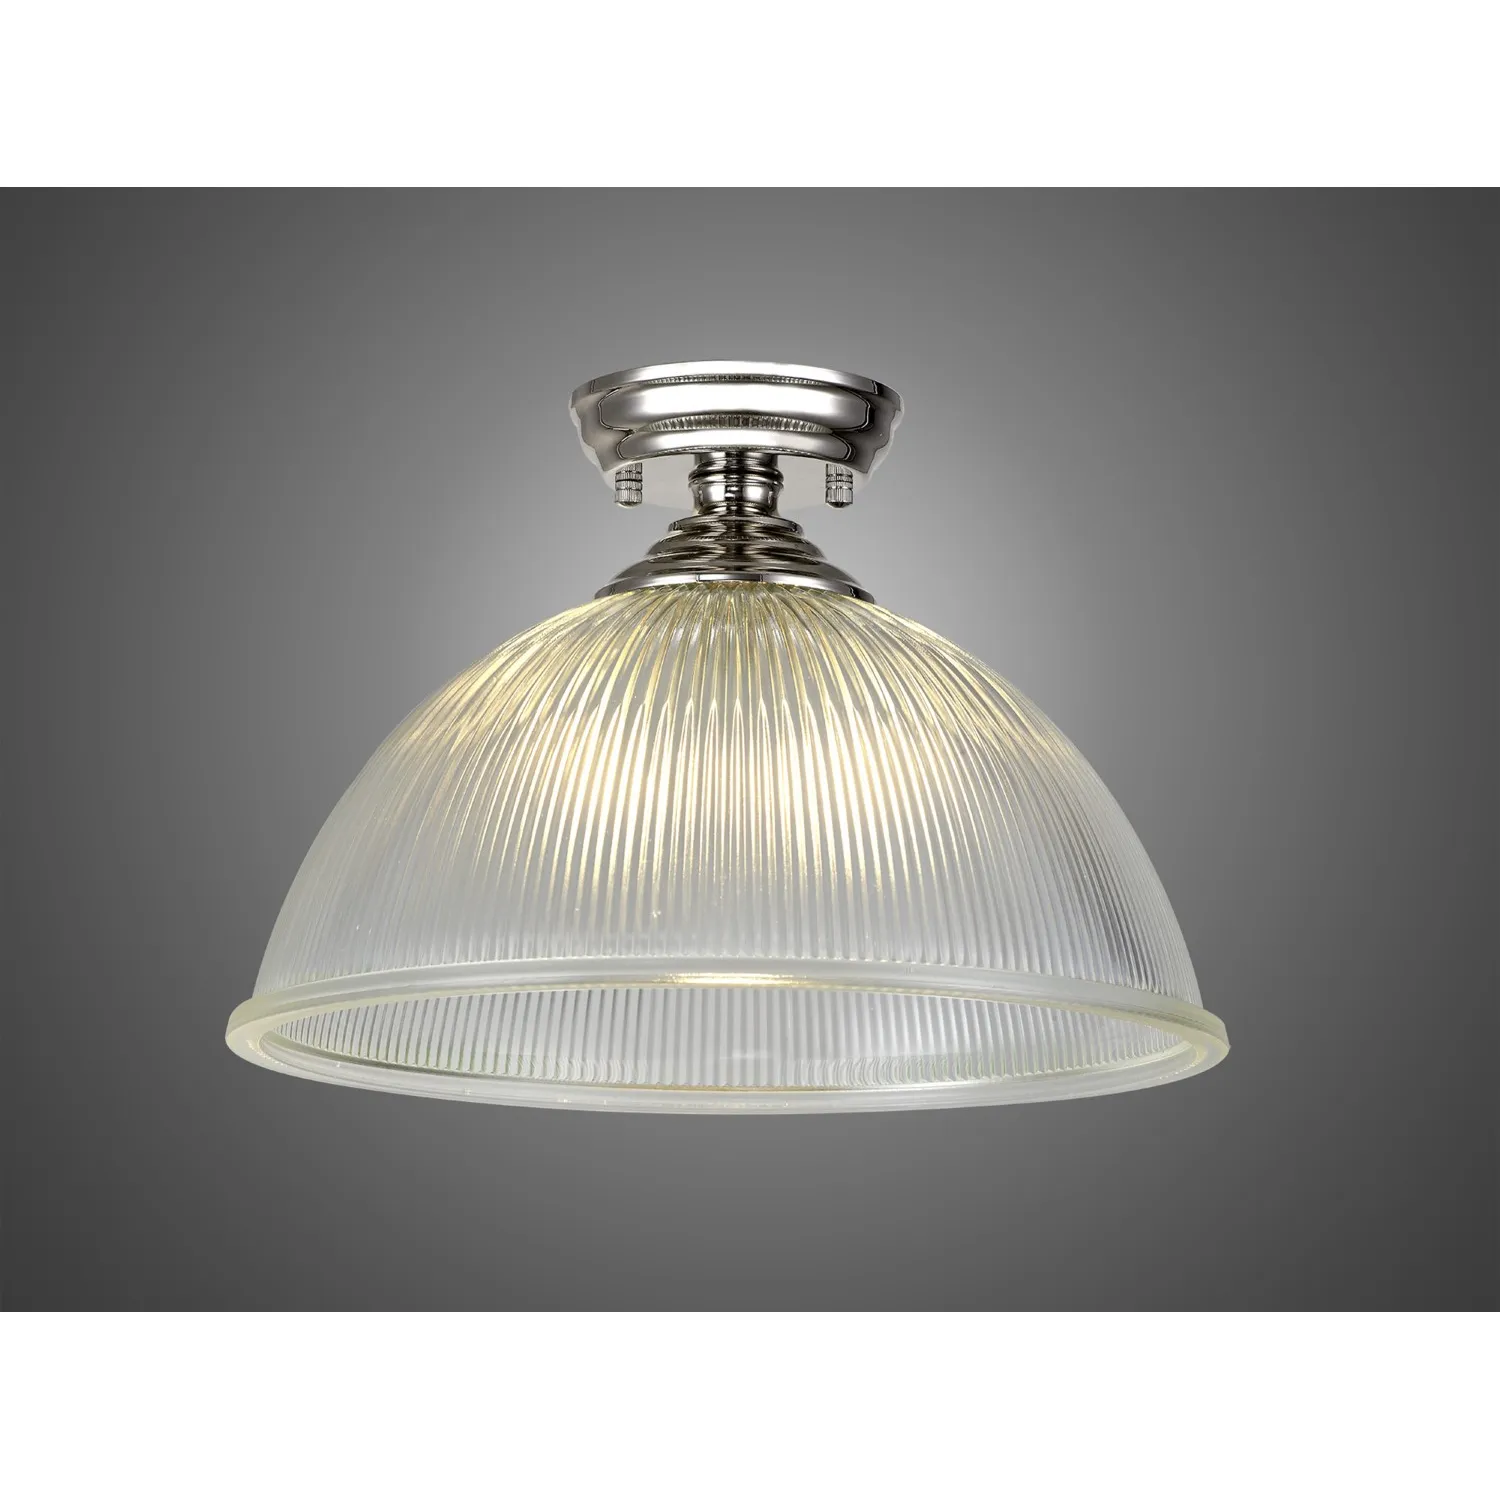 Billericay 1 Light Flush Ceiling E27 With Dome 38cm Glass Shade Polished Nickel Clear